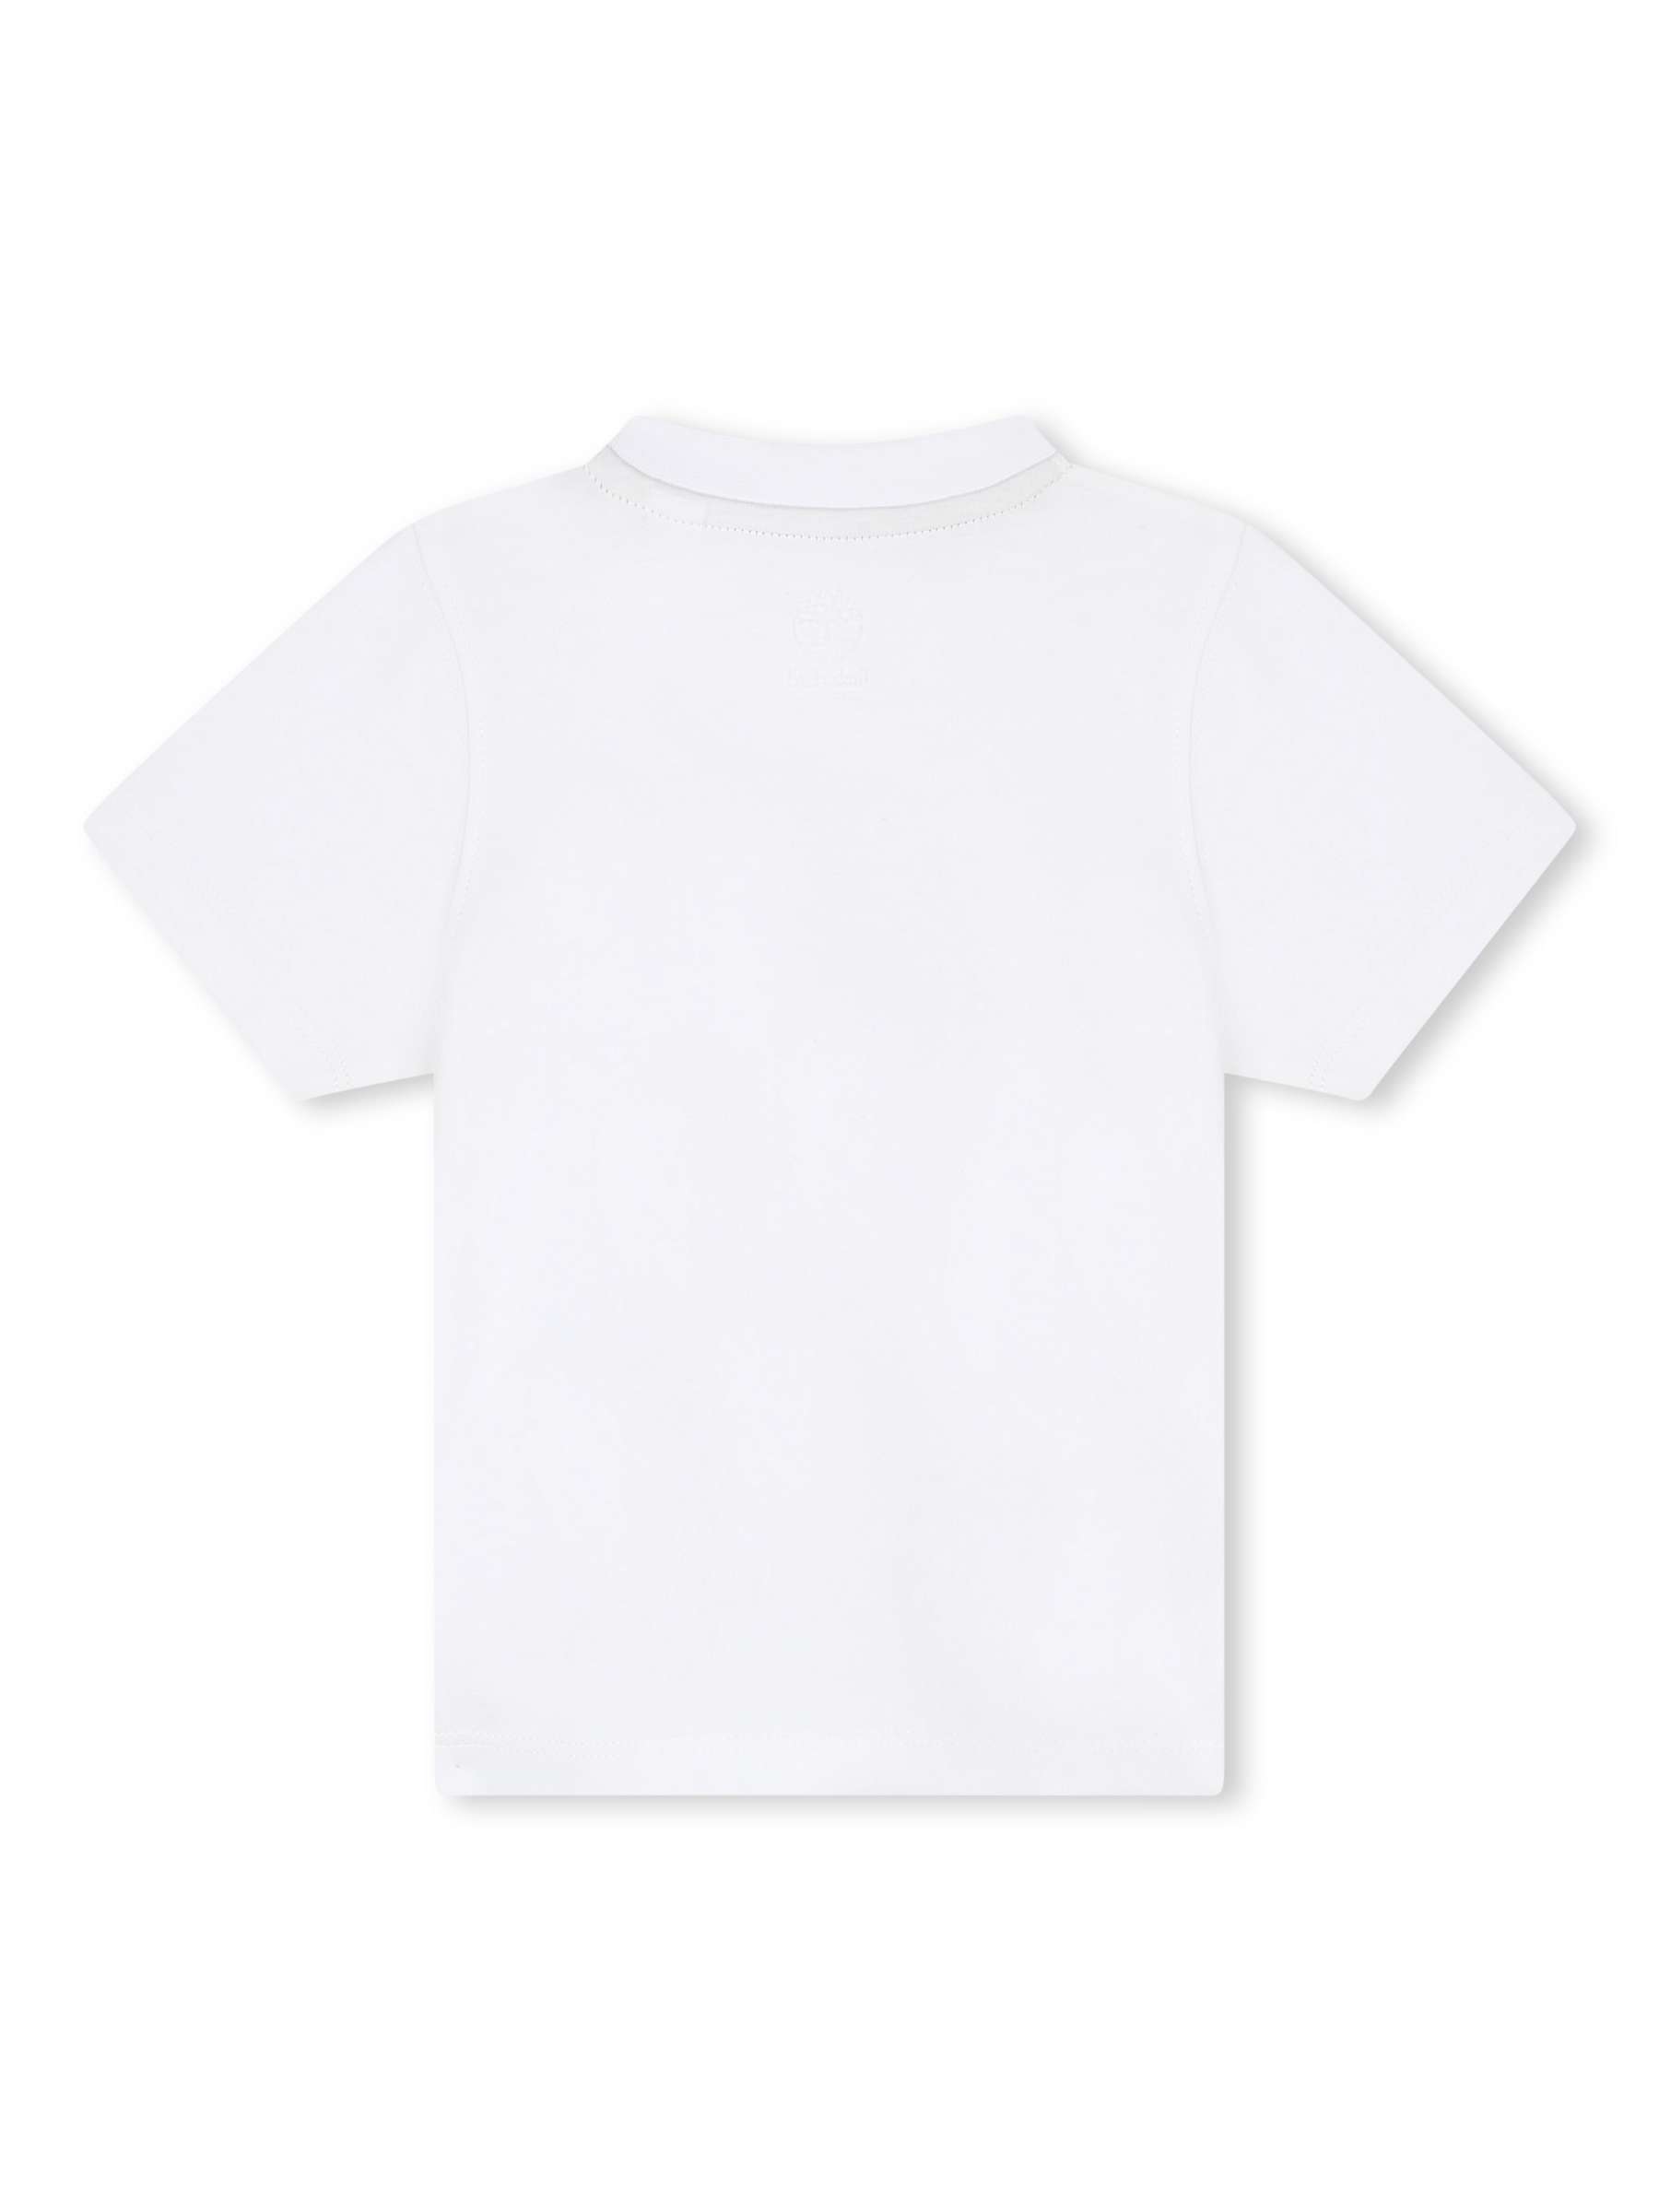 Buy Timberland Baby Go For The Adventure Logo T-Shirt, White Online at johnlewis.com